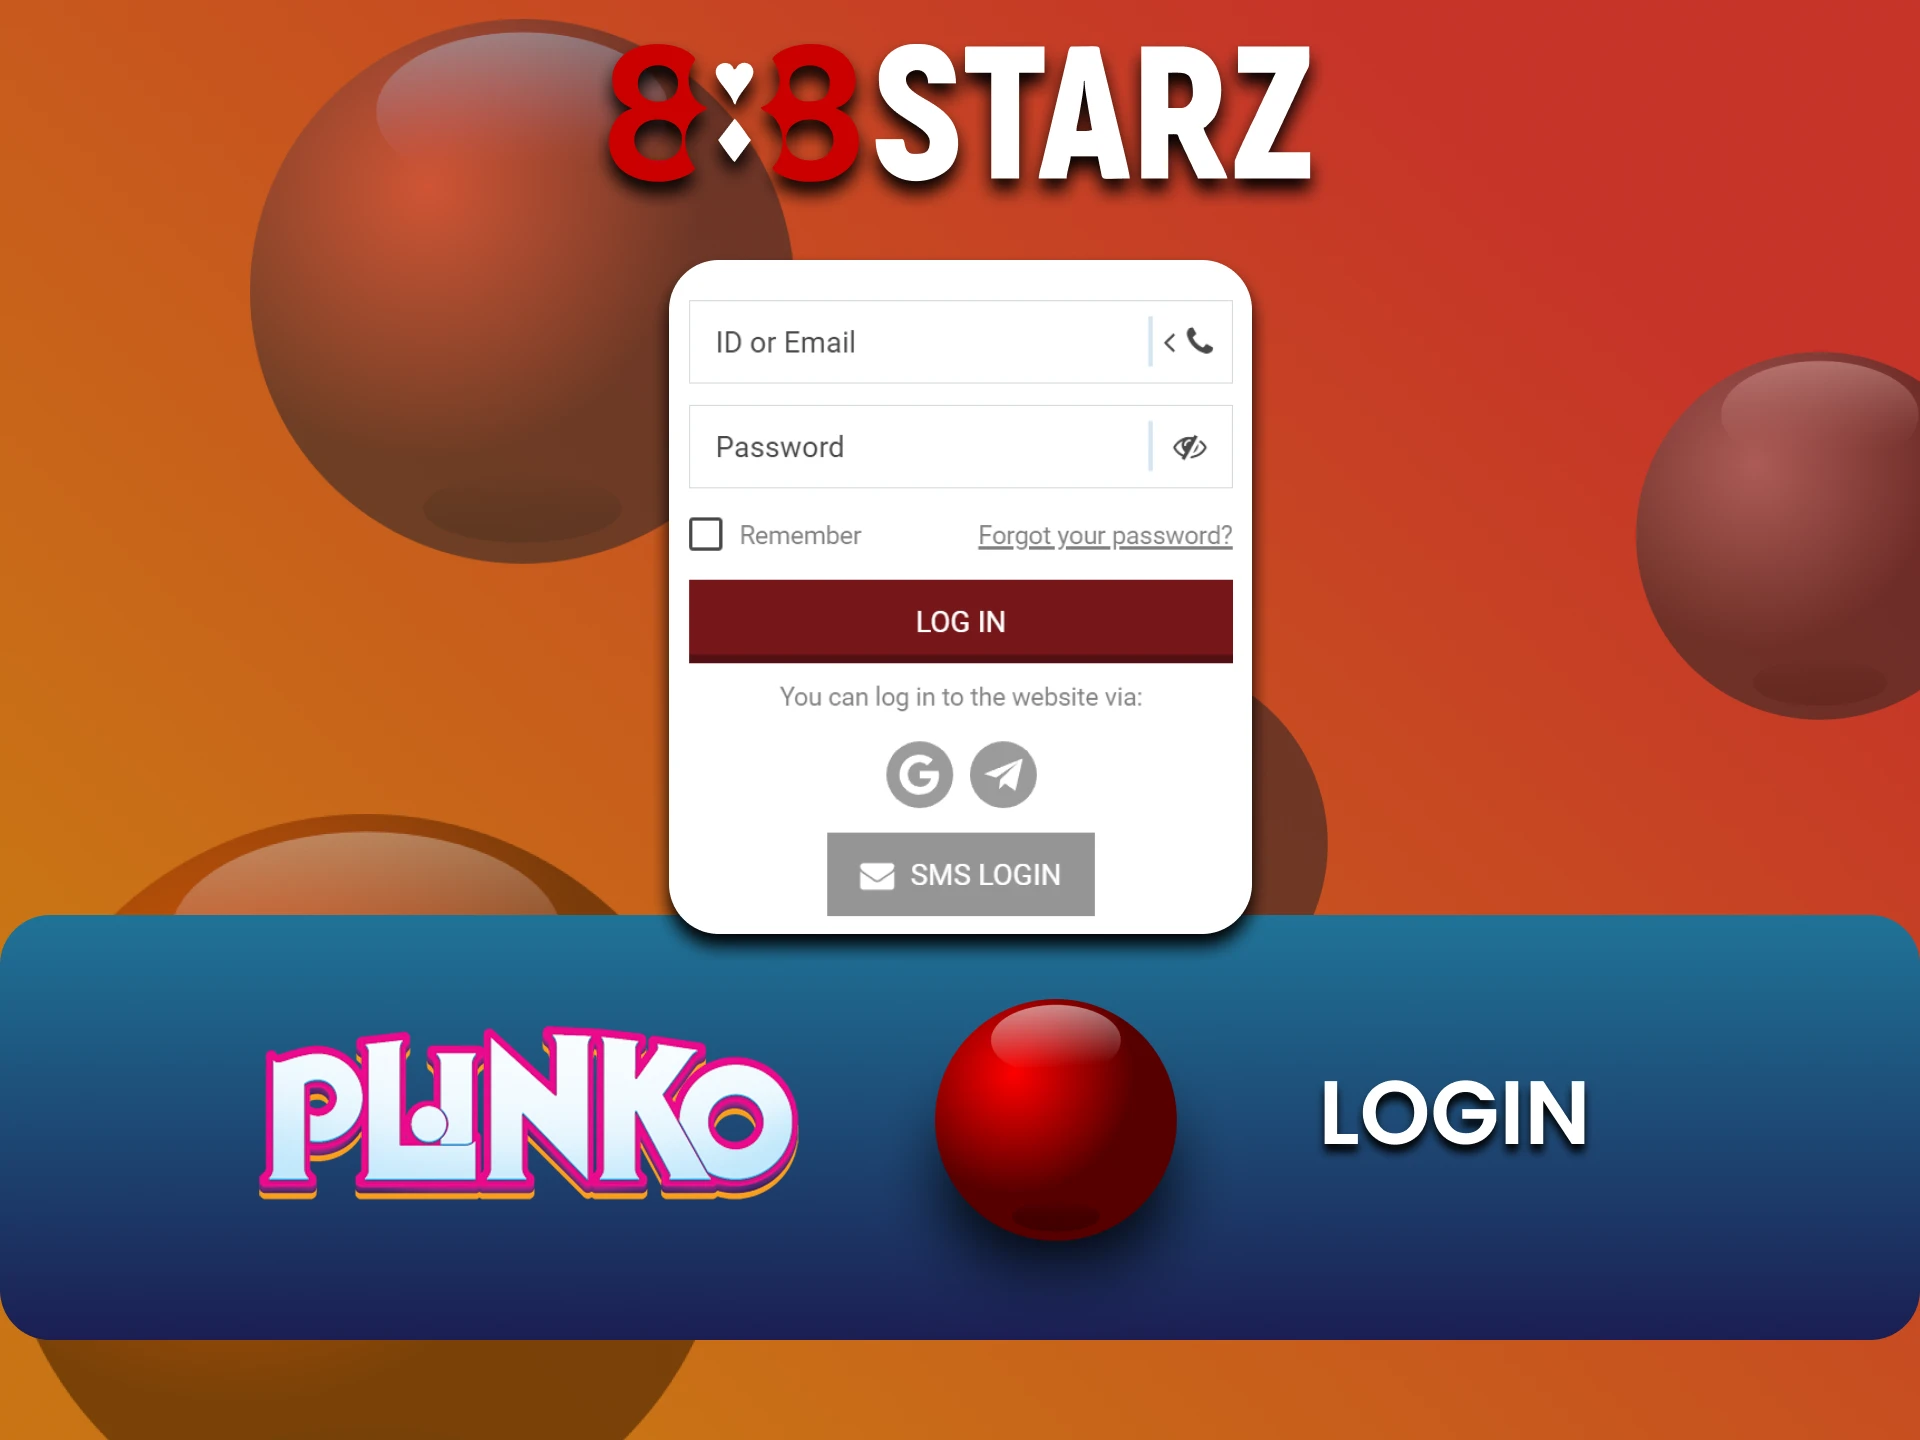 Log in to your personal 888starz account to play Plinko.